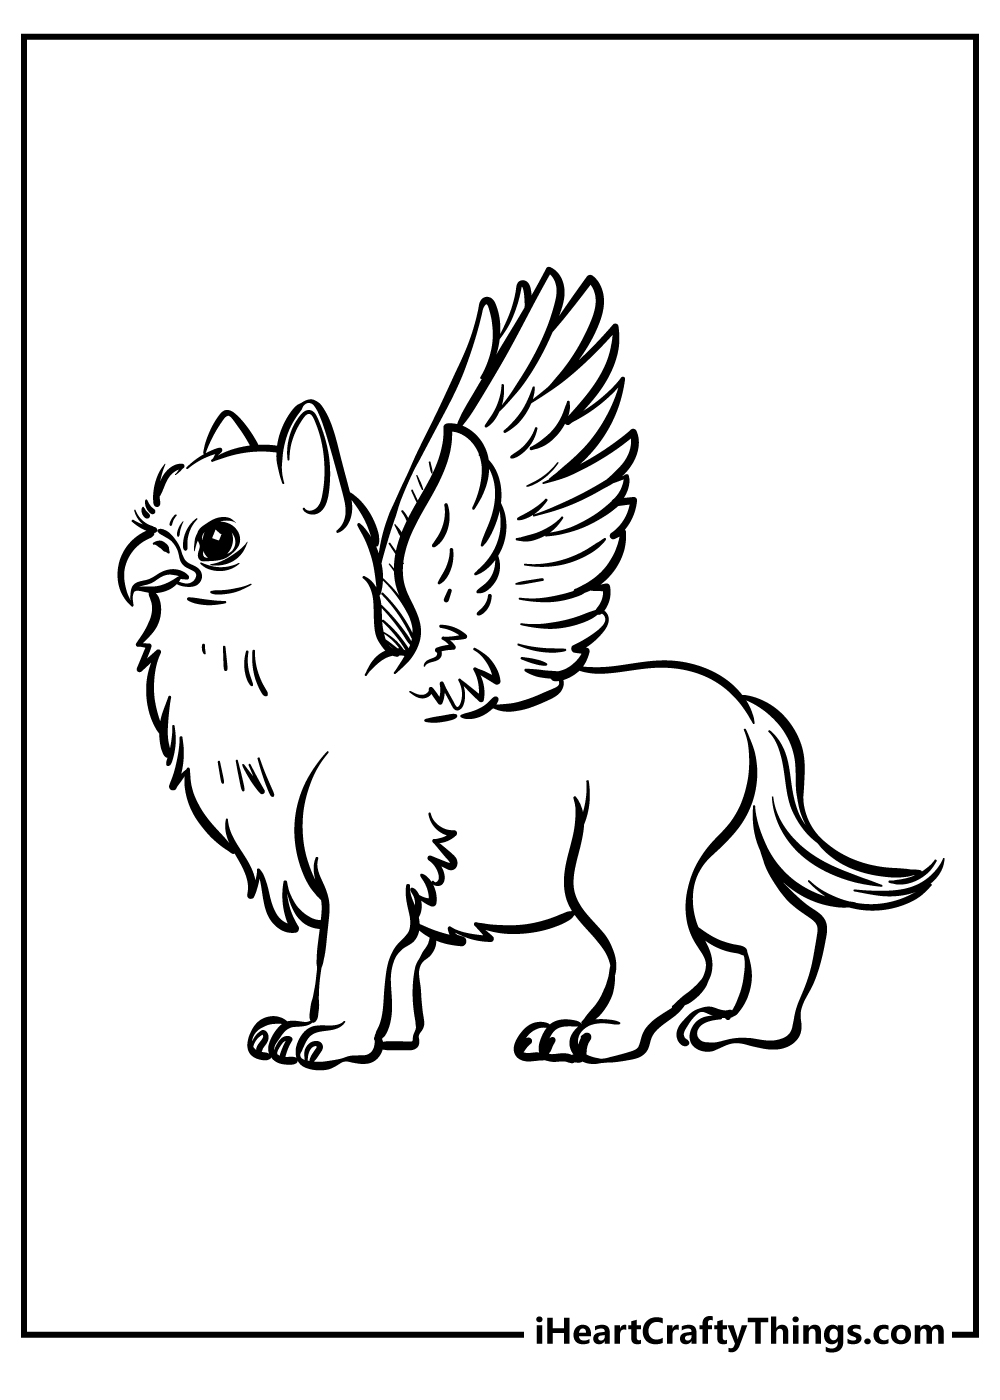 Griffin Coloring Sheet for children free download